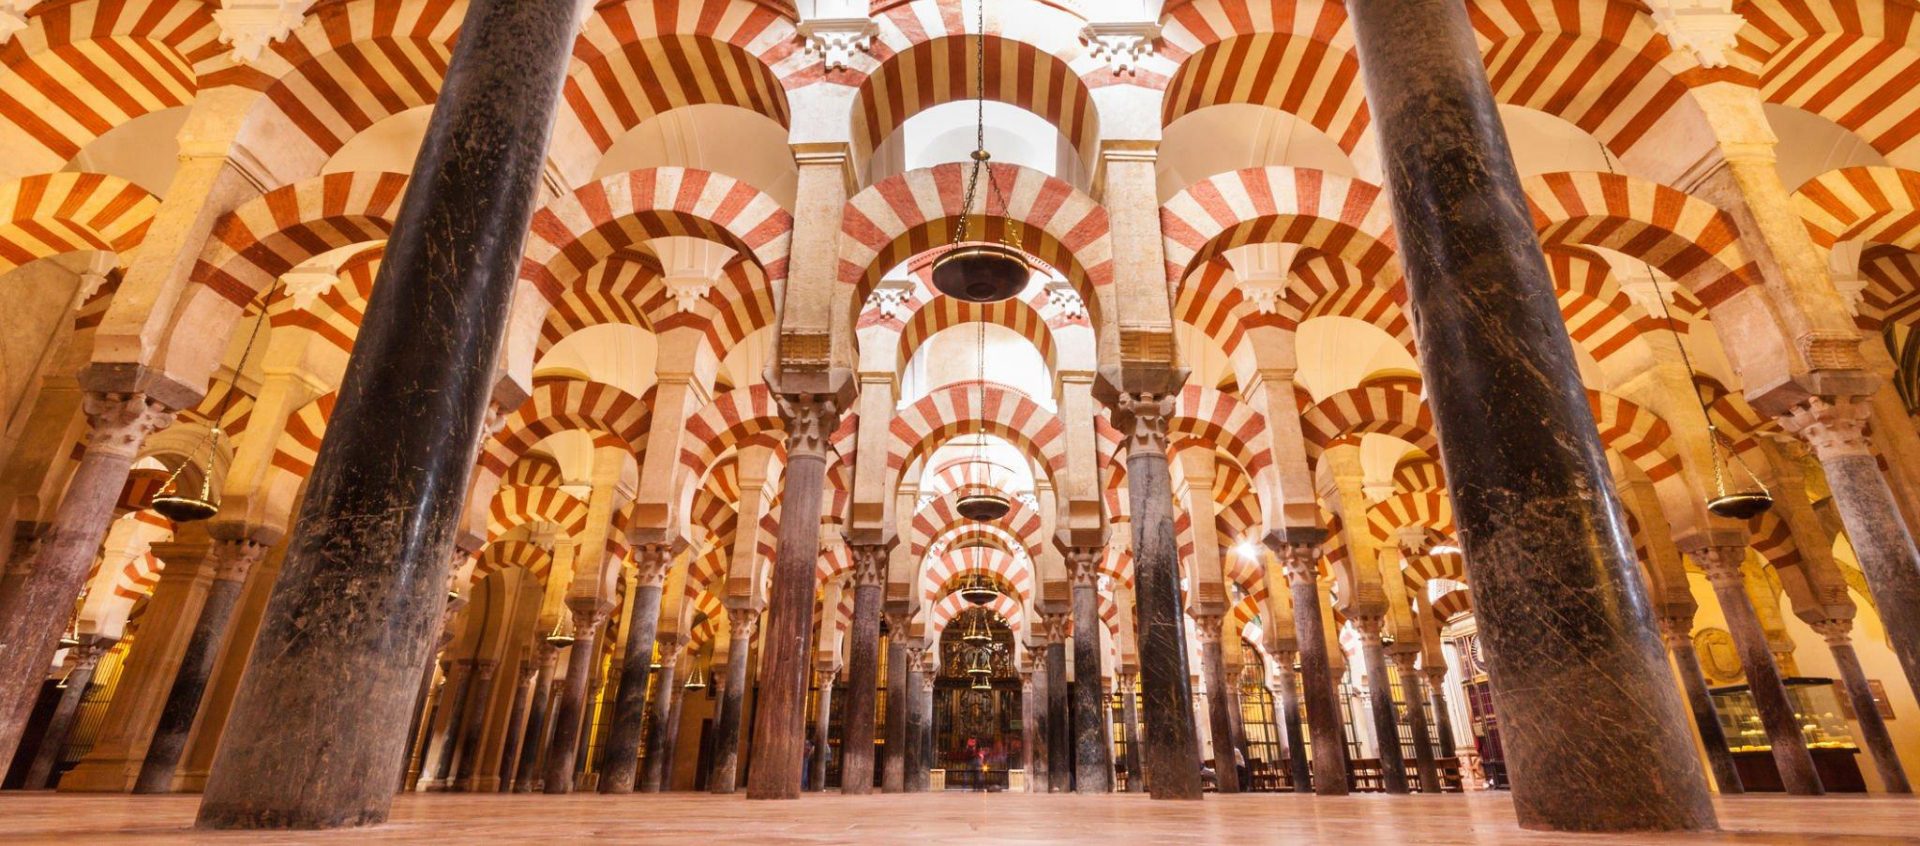 Infinite arches of the interior of the mosque cathedral of Cordoba that we enjoyed on our private visit.